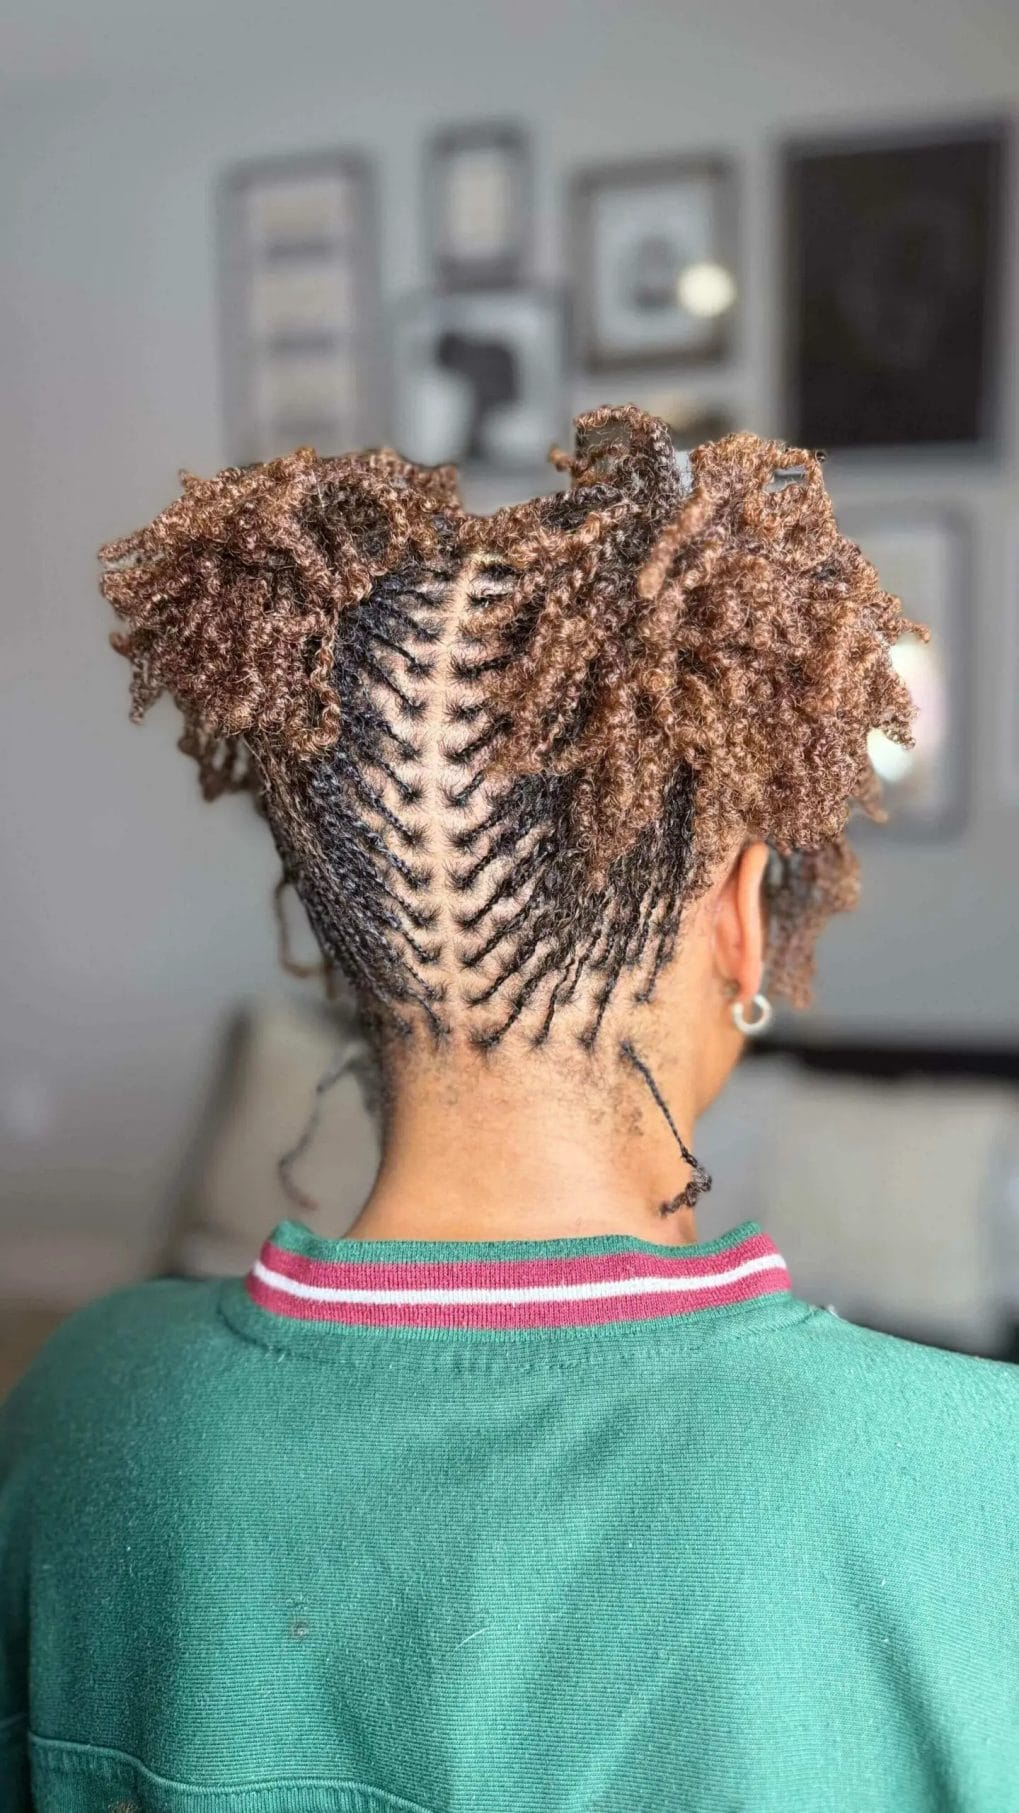 Cornrows and curly twists combination with honey-toned highlights